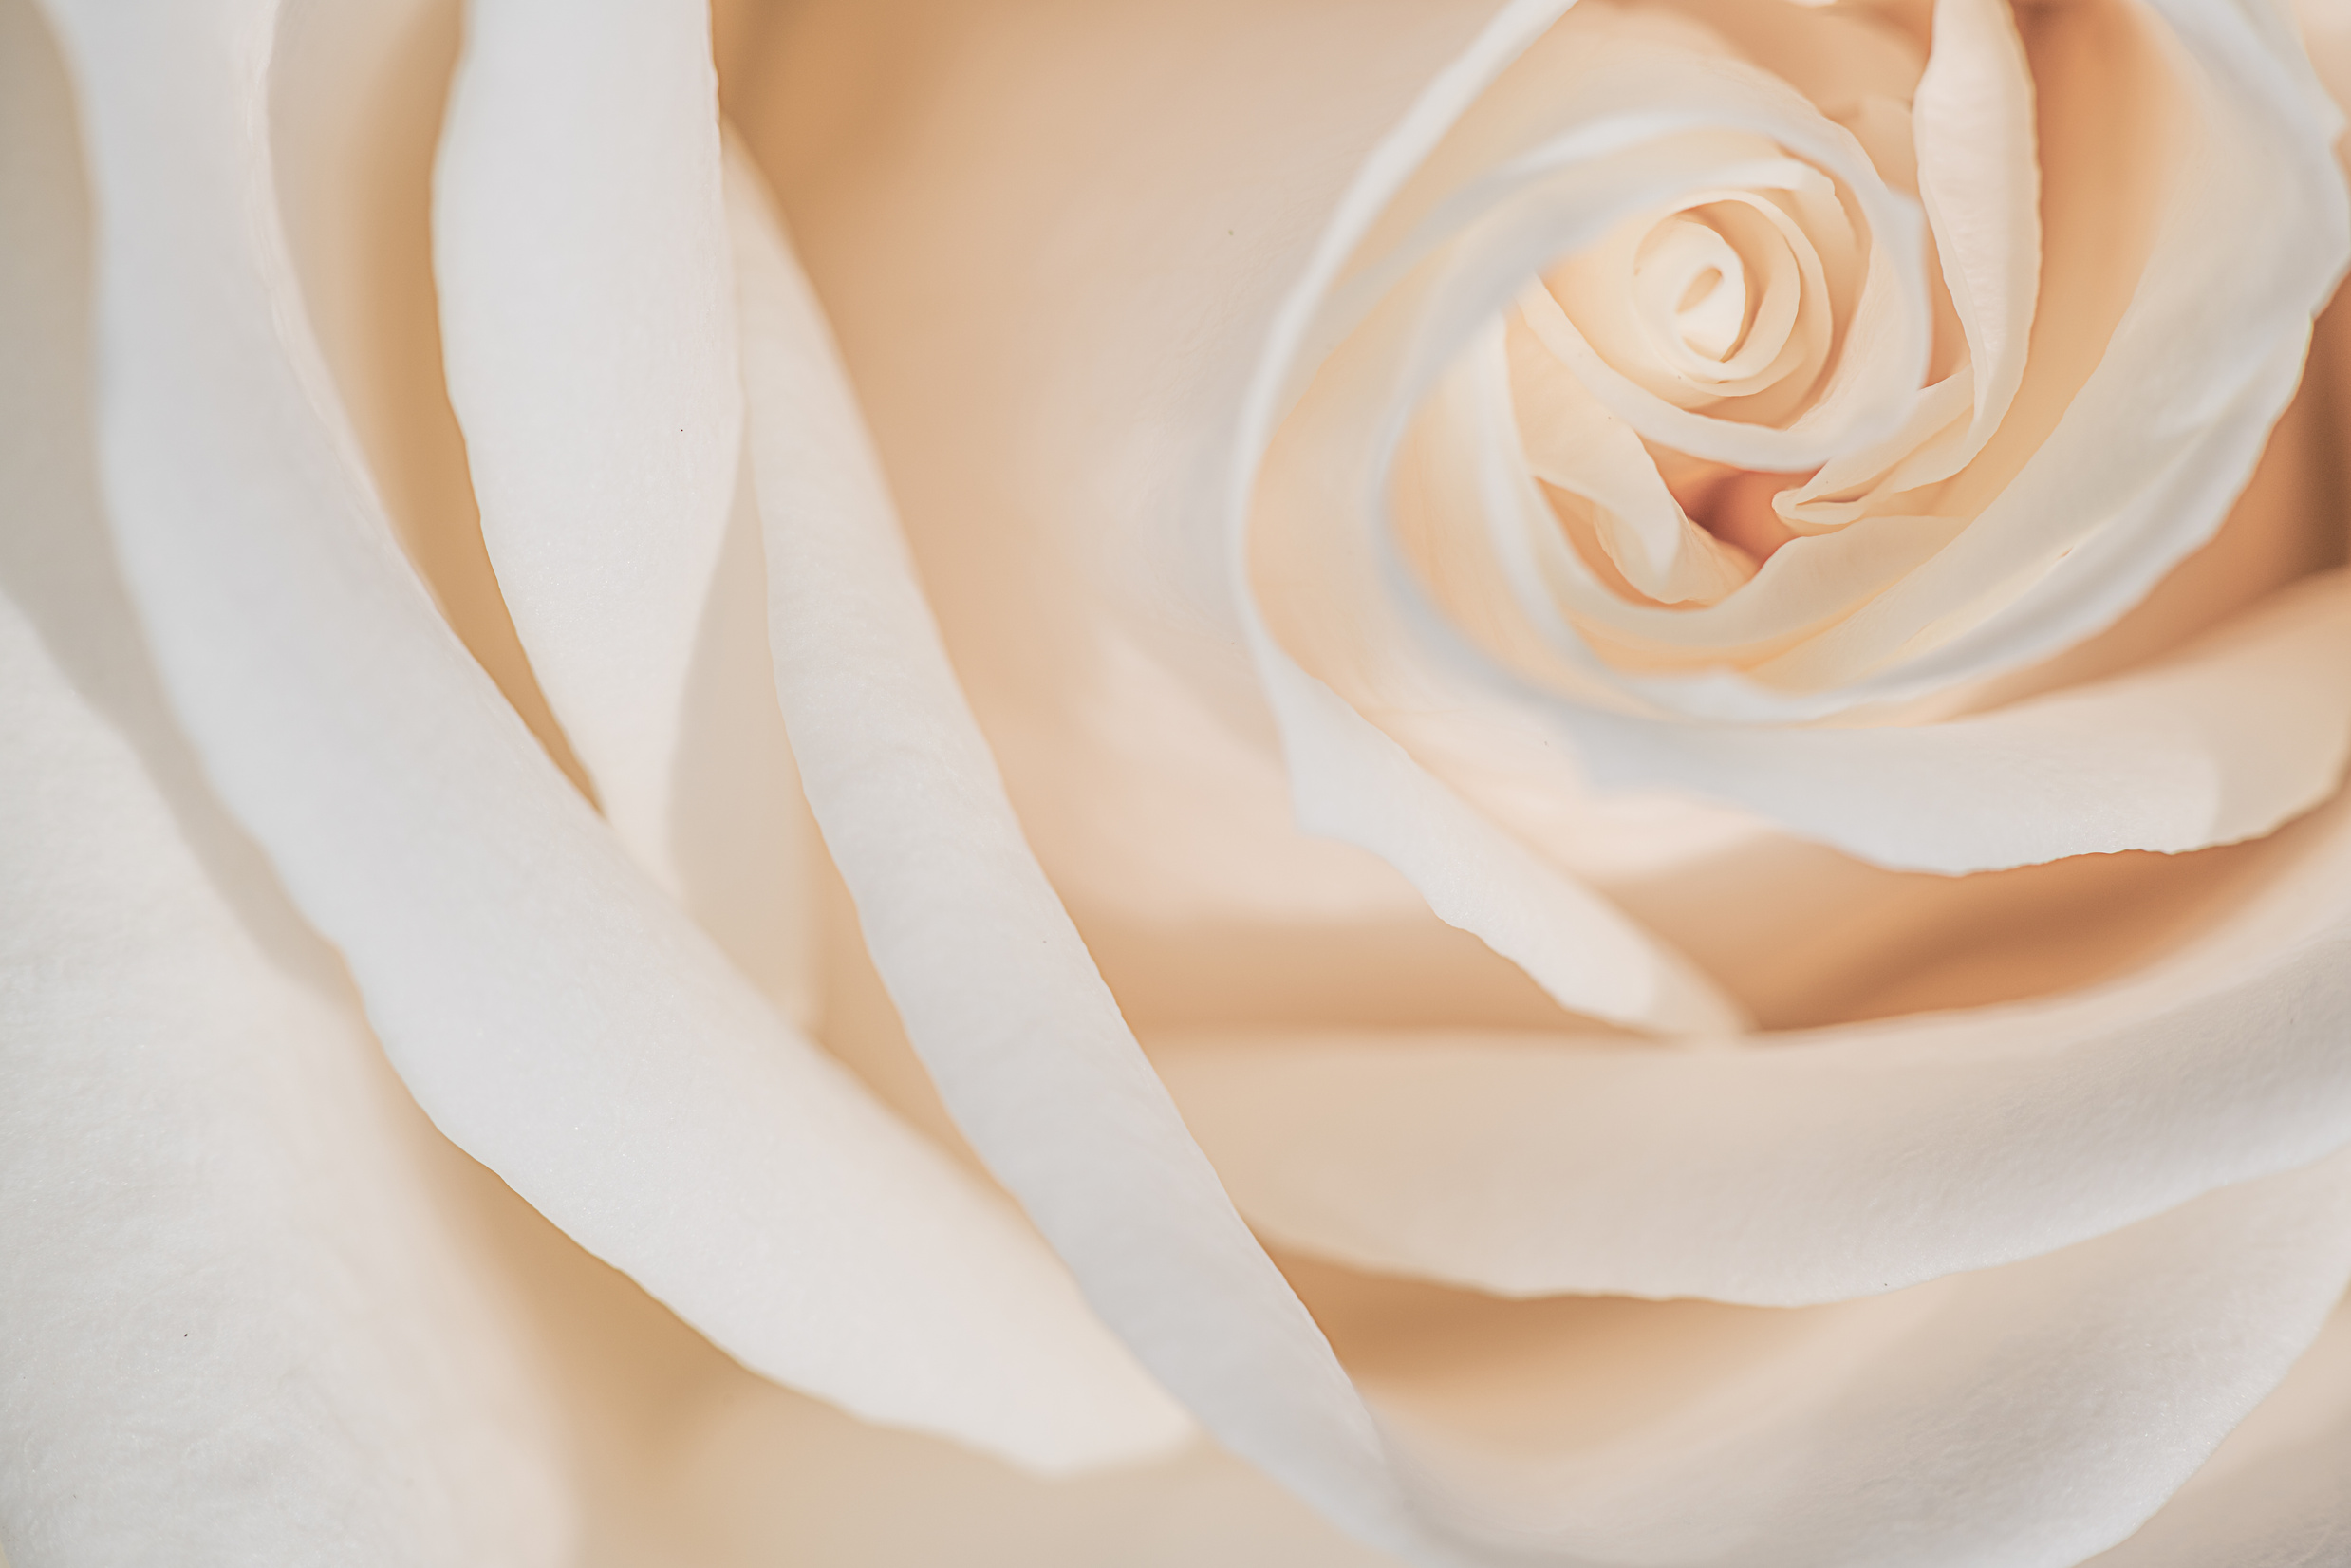 Background of smooth gentle petals of rose